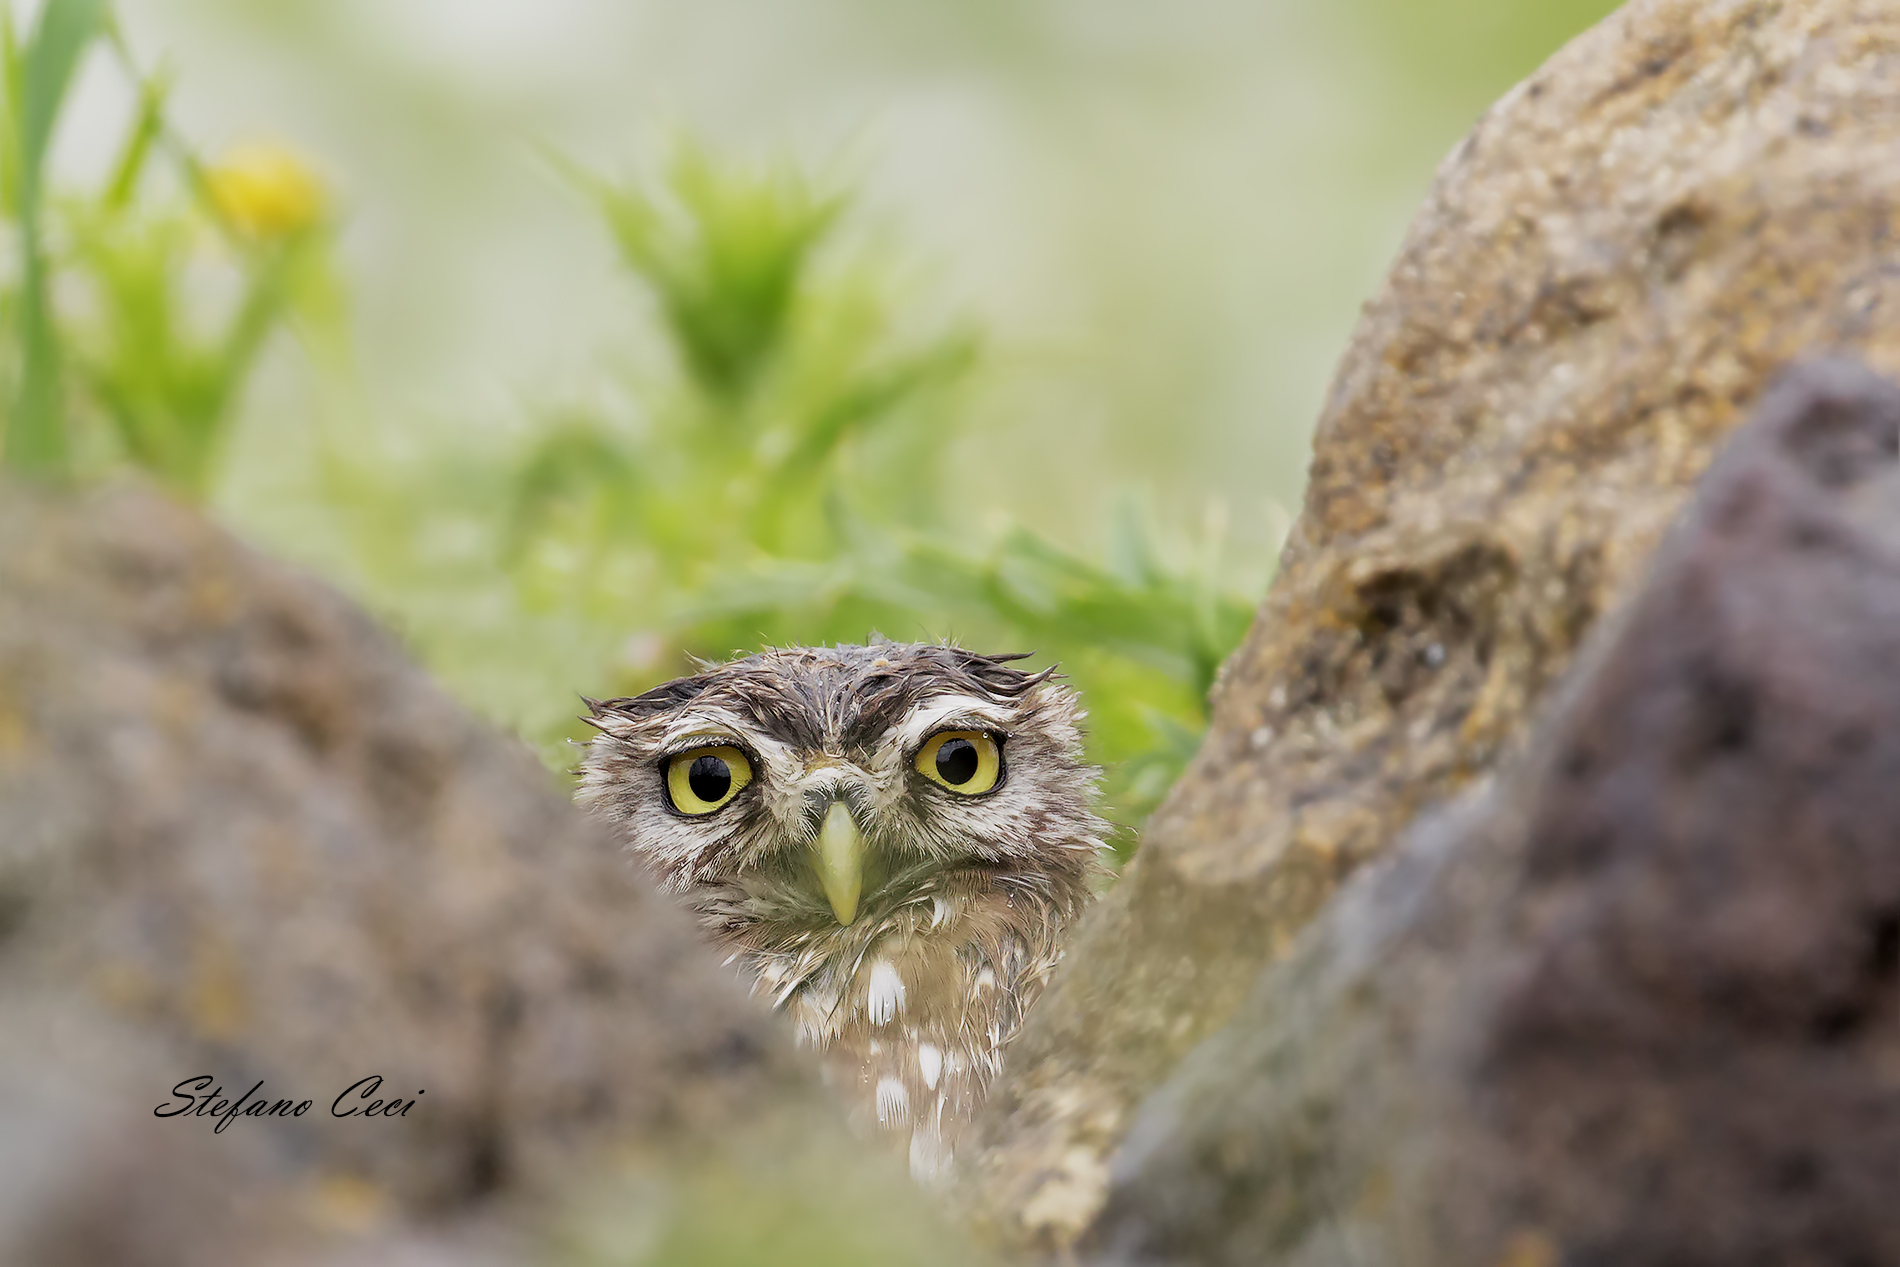 The Owl in the rock...